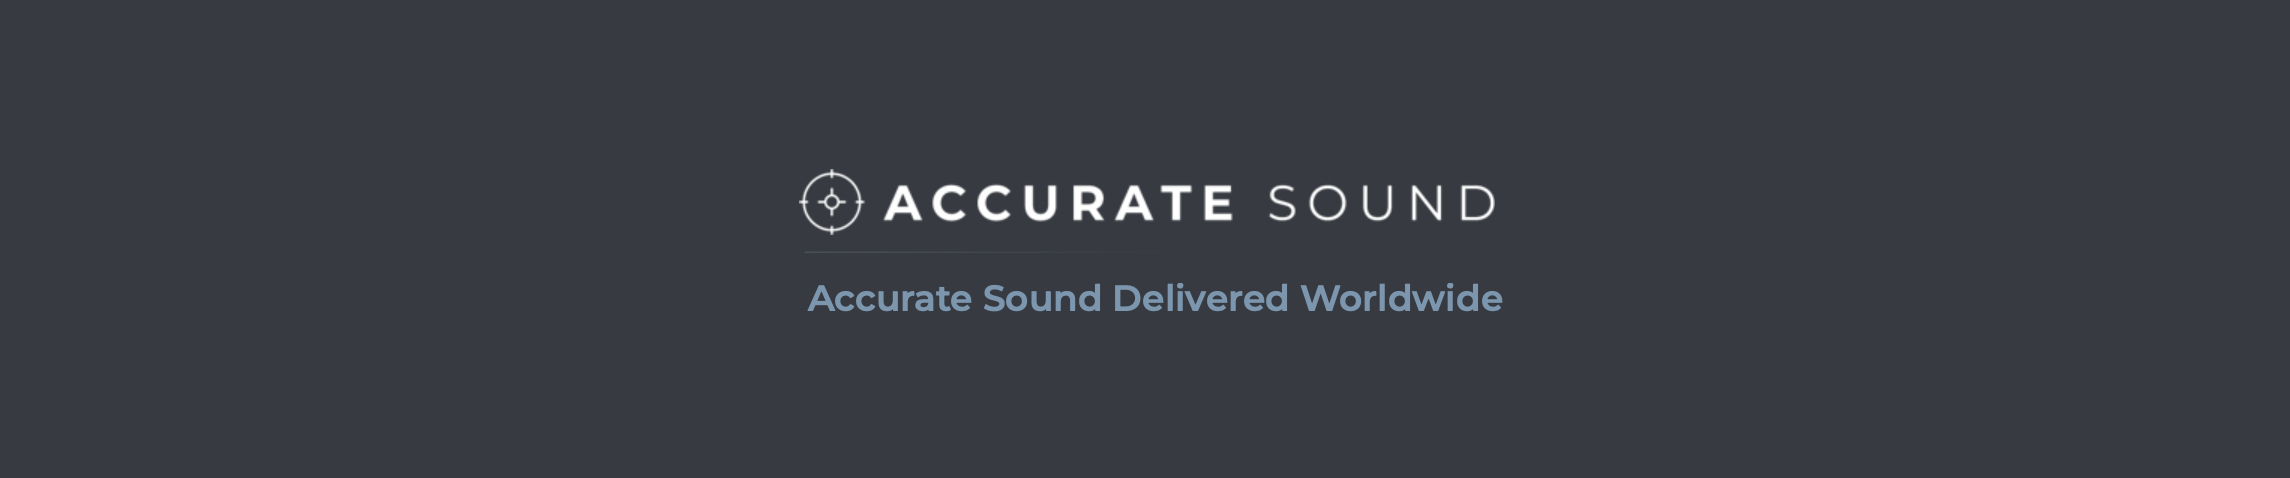 Accurate Sound Launches Multichannel Hang Loose Convolver